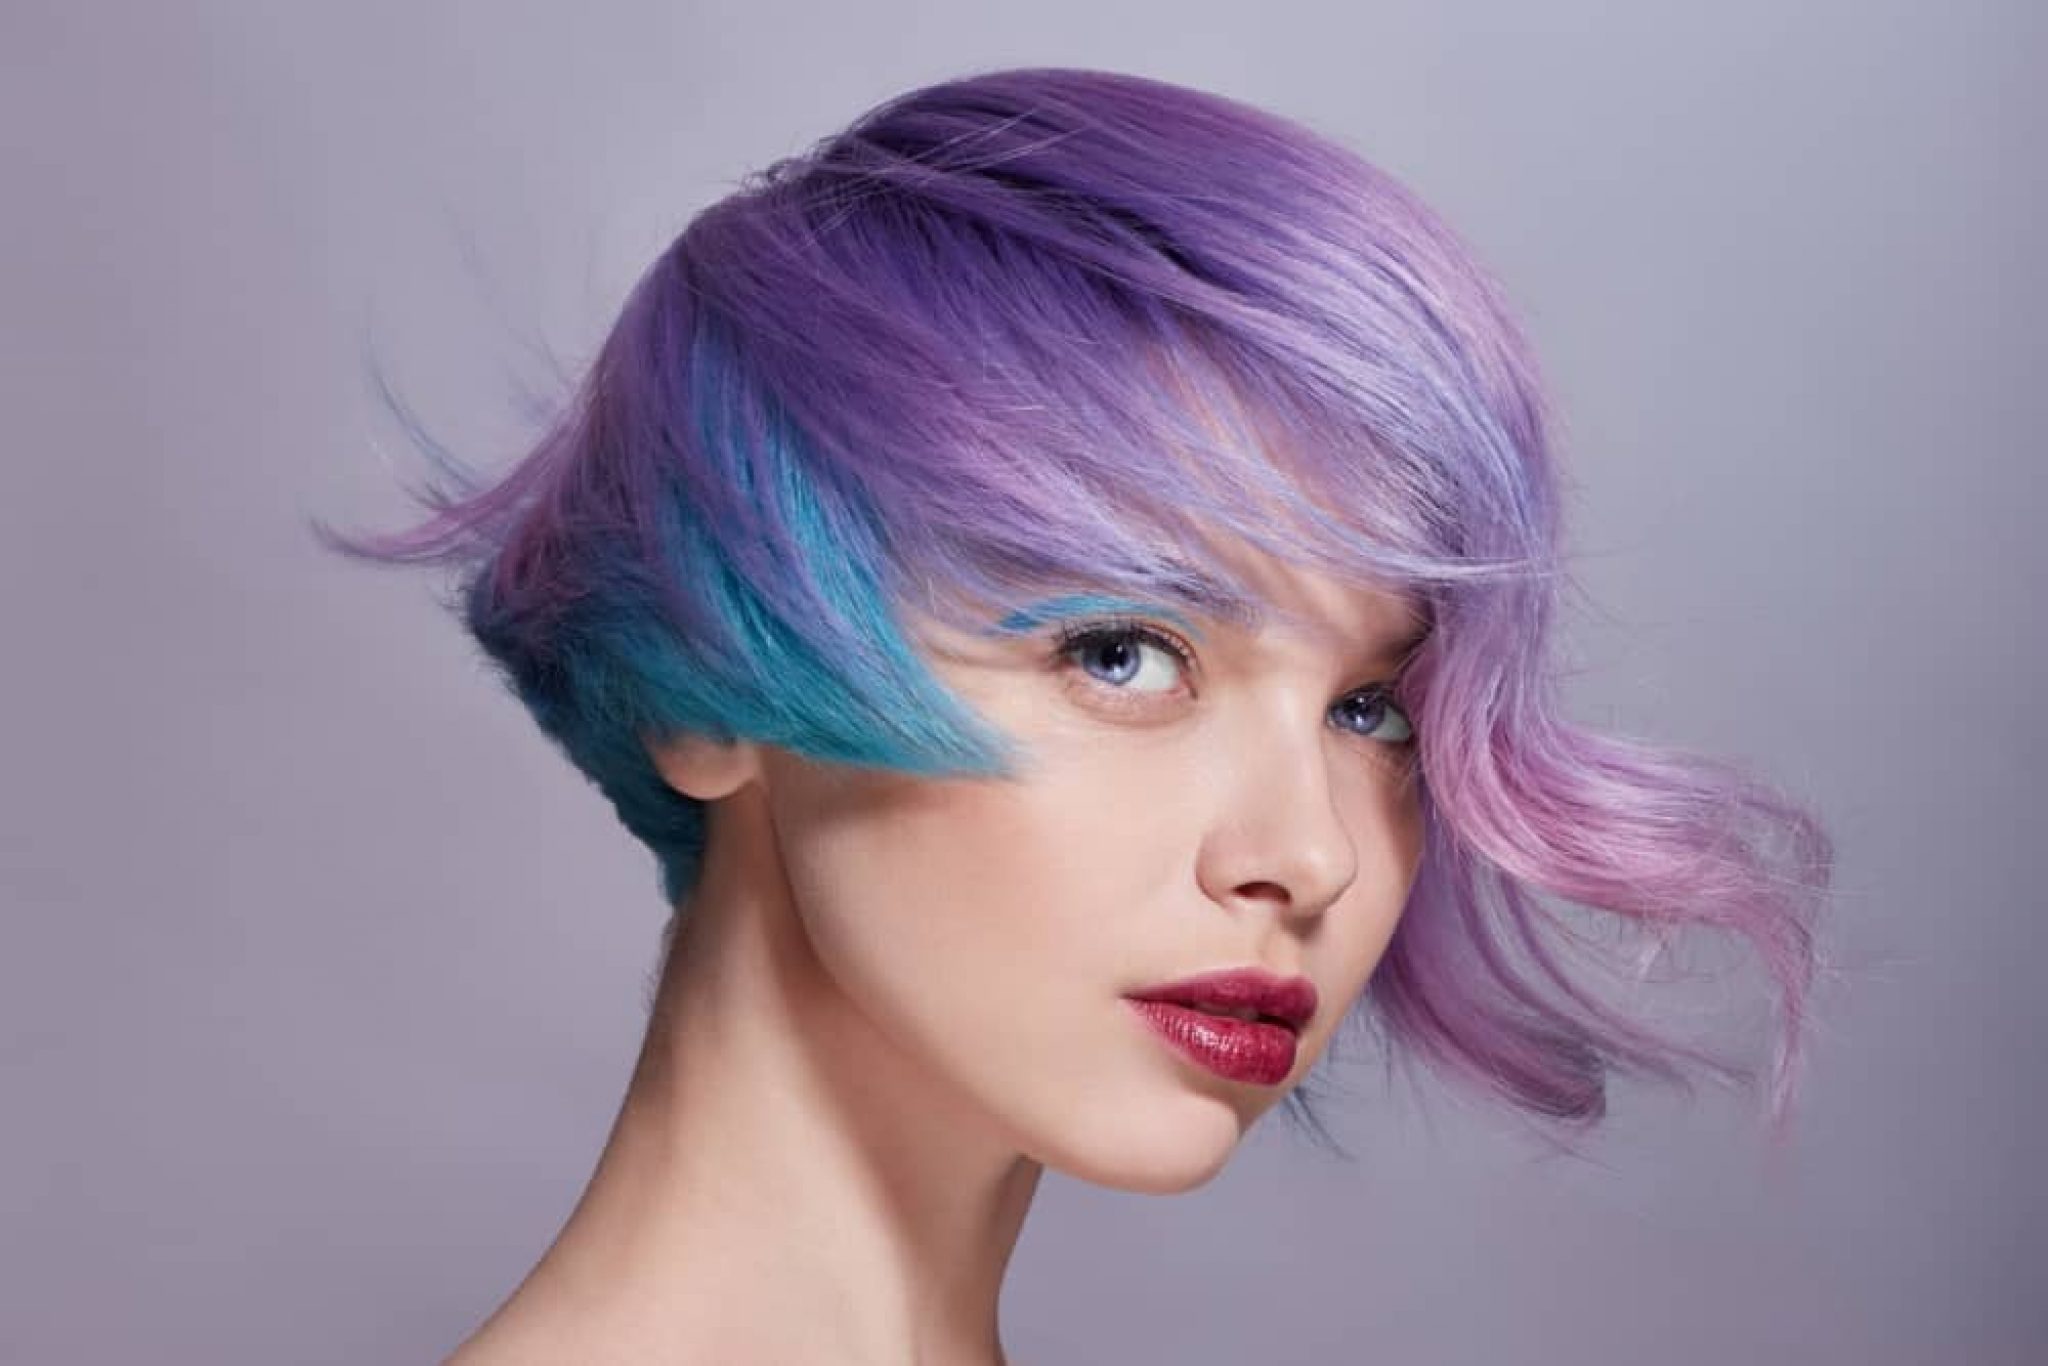 3. The Best Products for Maintaining Light Blue Over Purple Hair - wide 3